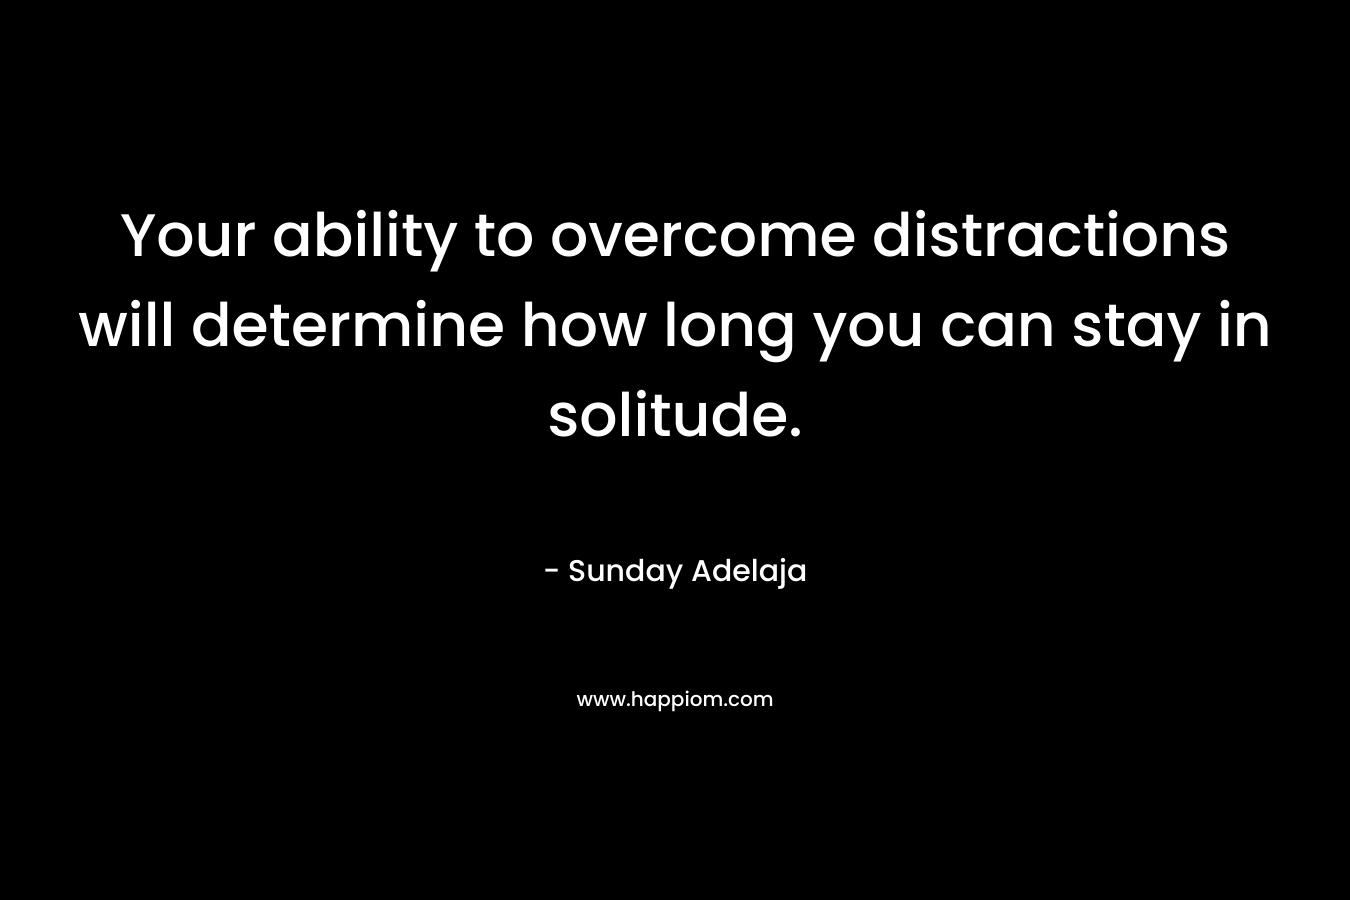 Your ability to overcome distractions will determine how long you can stay in solitude.